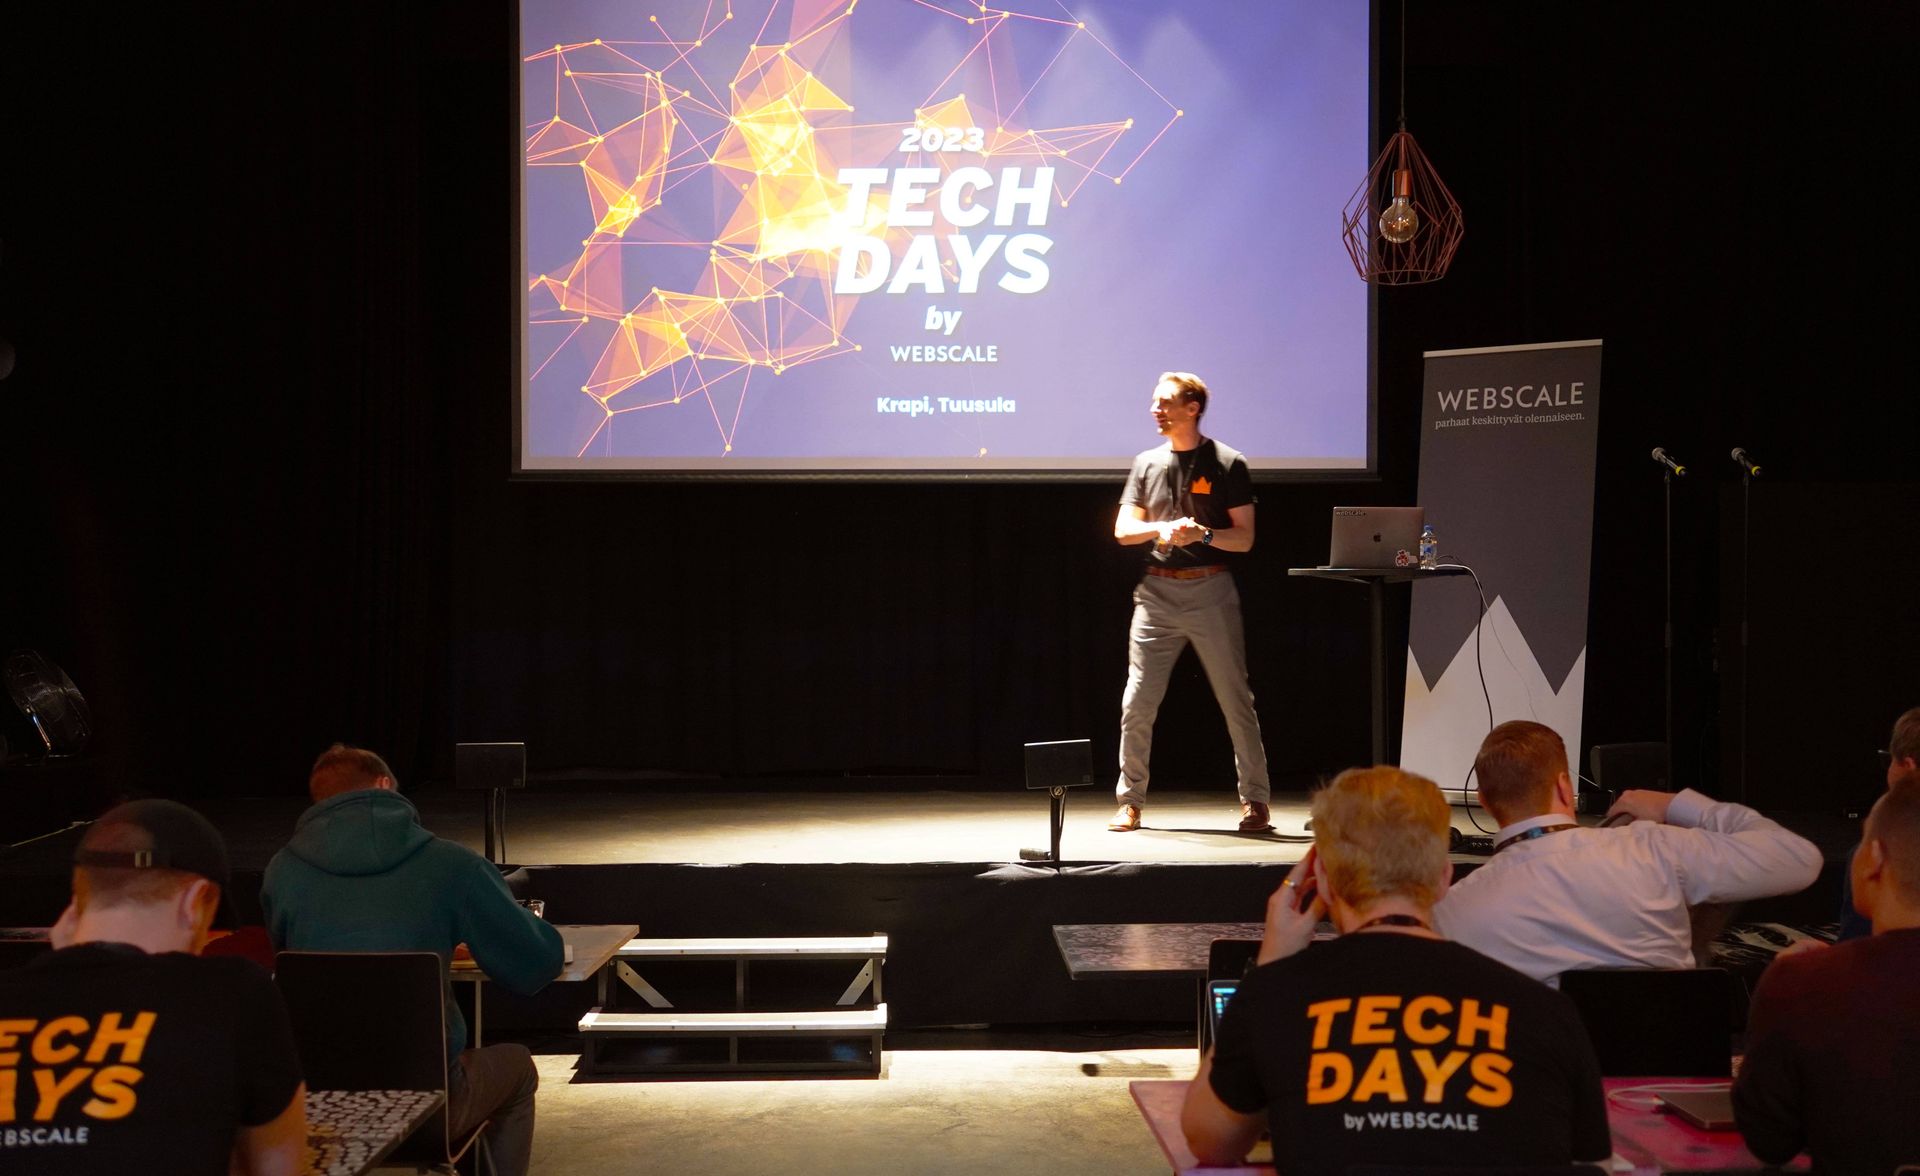 Webscale Tech Days konferenssi, Principal Consultant Juho Rautio